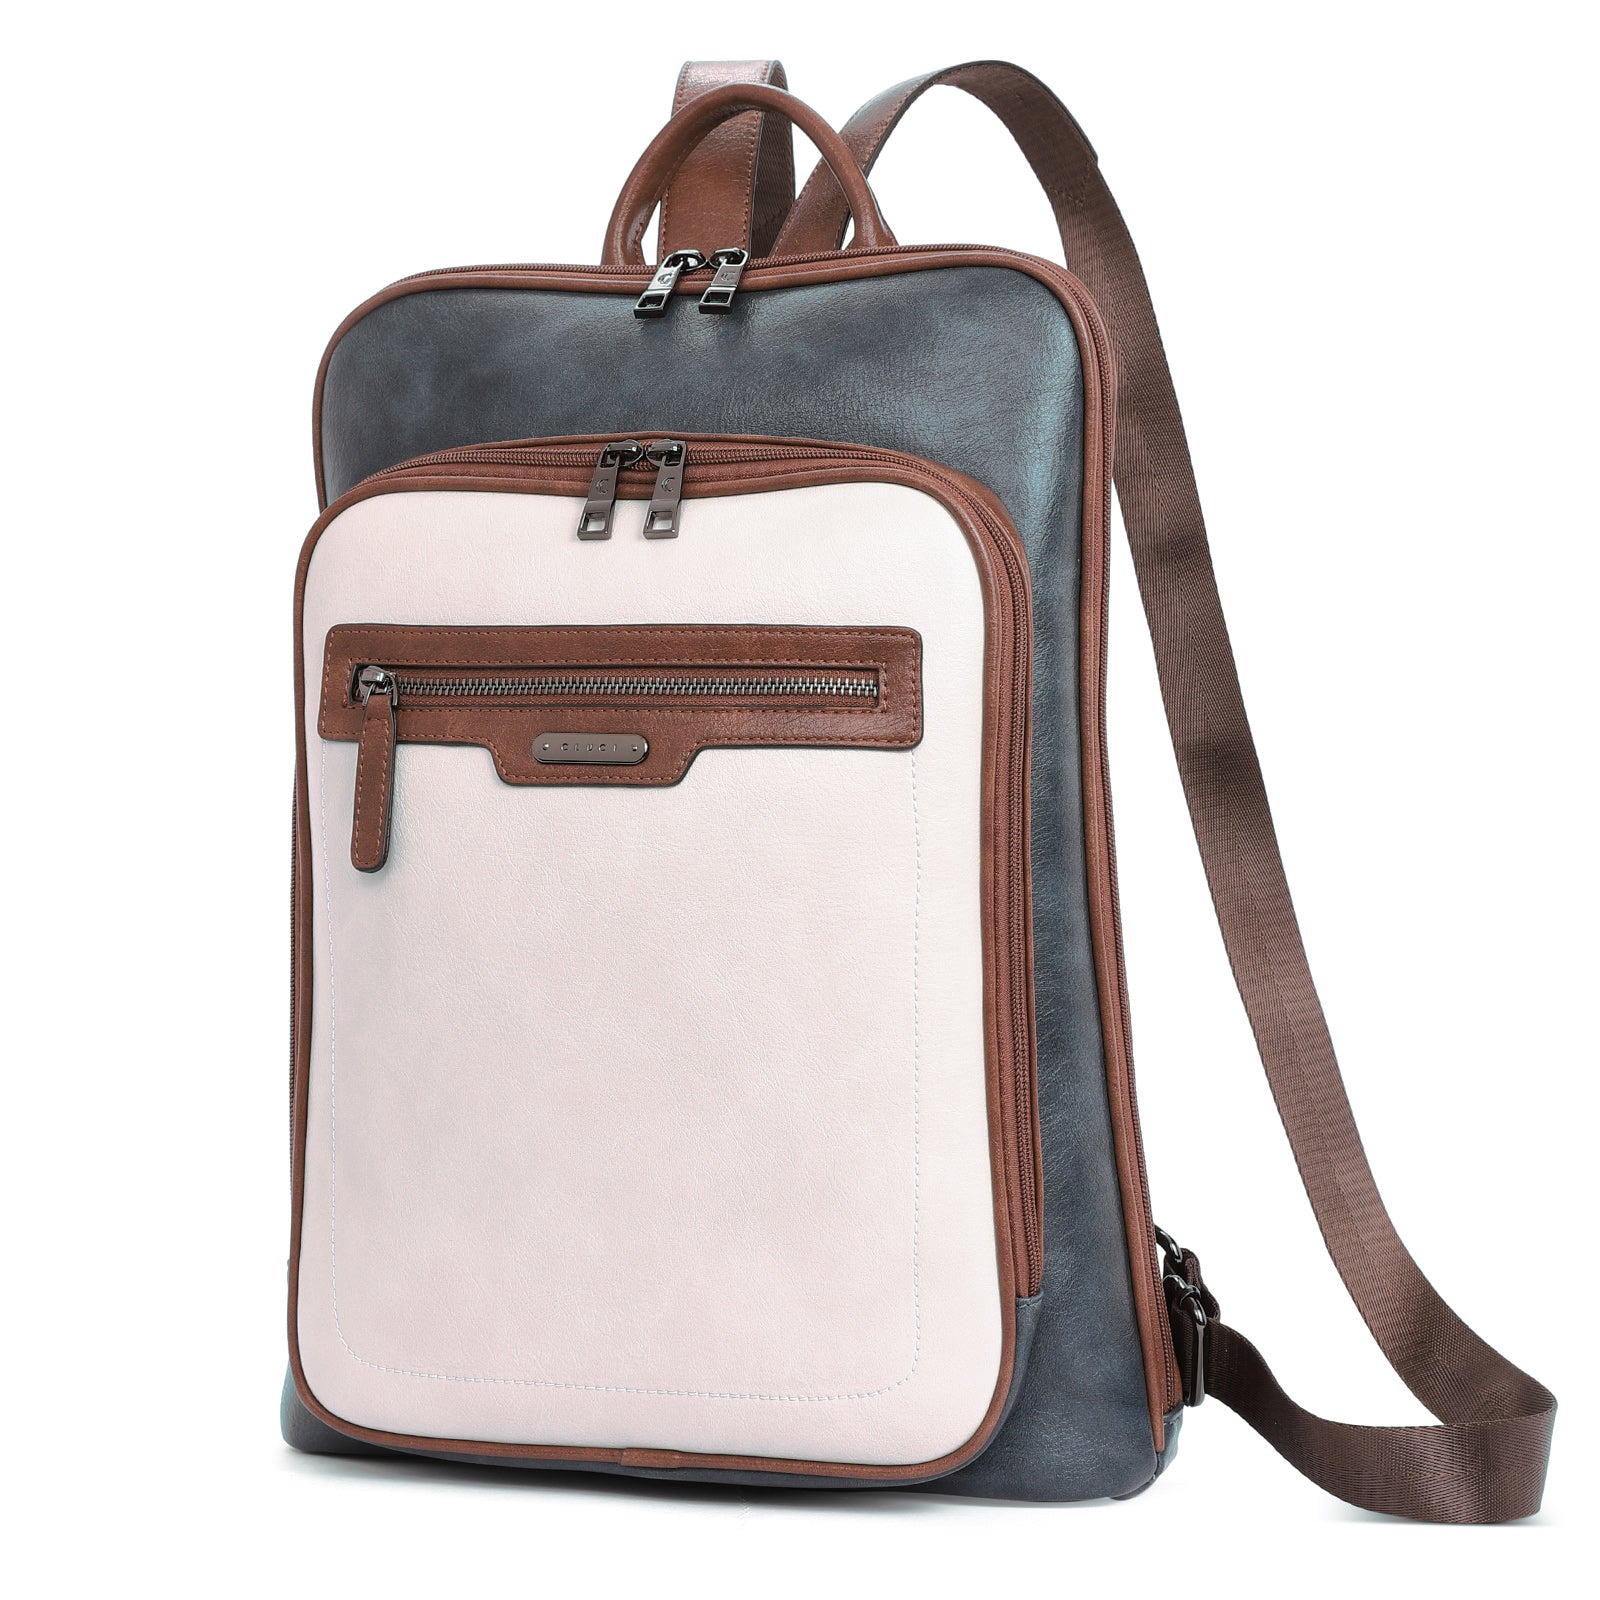 Koch Leather Laptop Backpack For Women With 15.6" Laptop Compartment